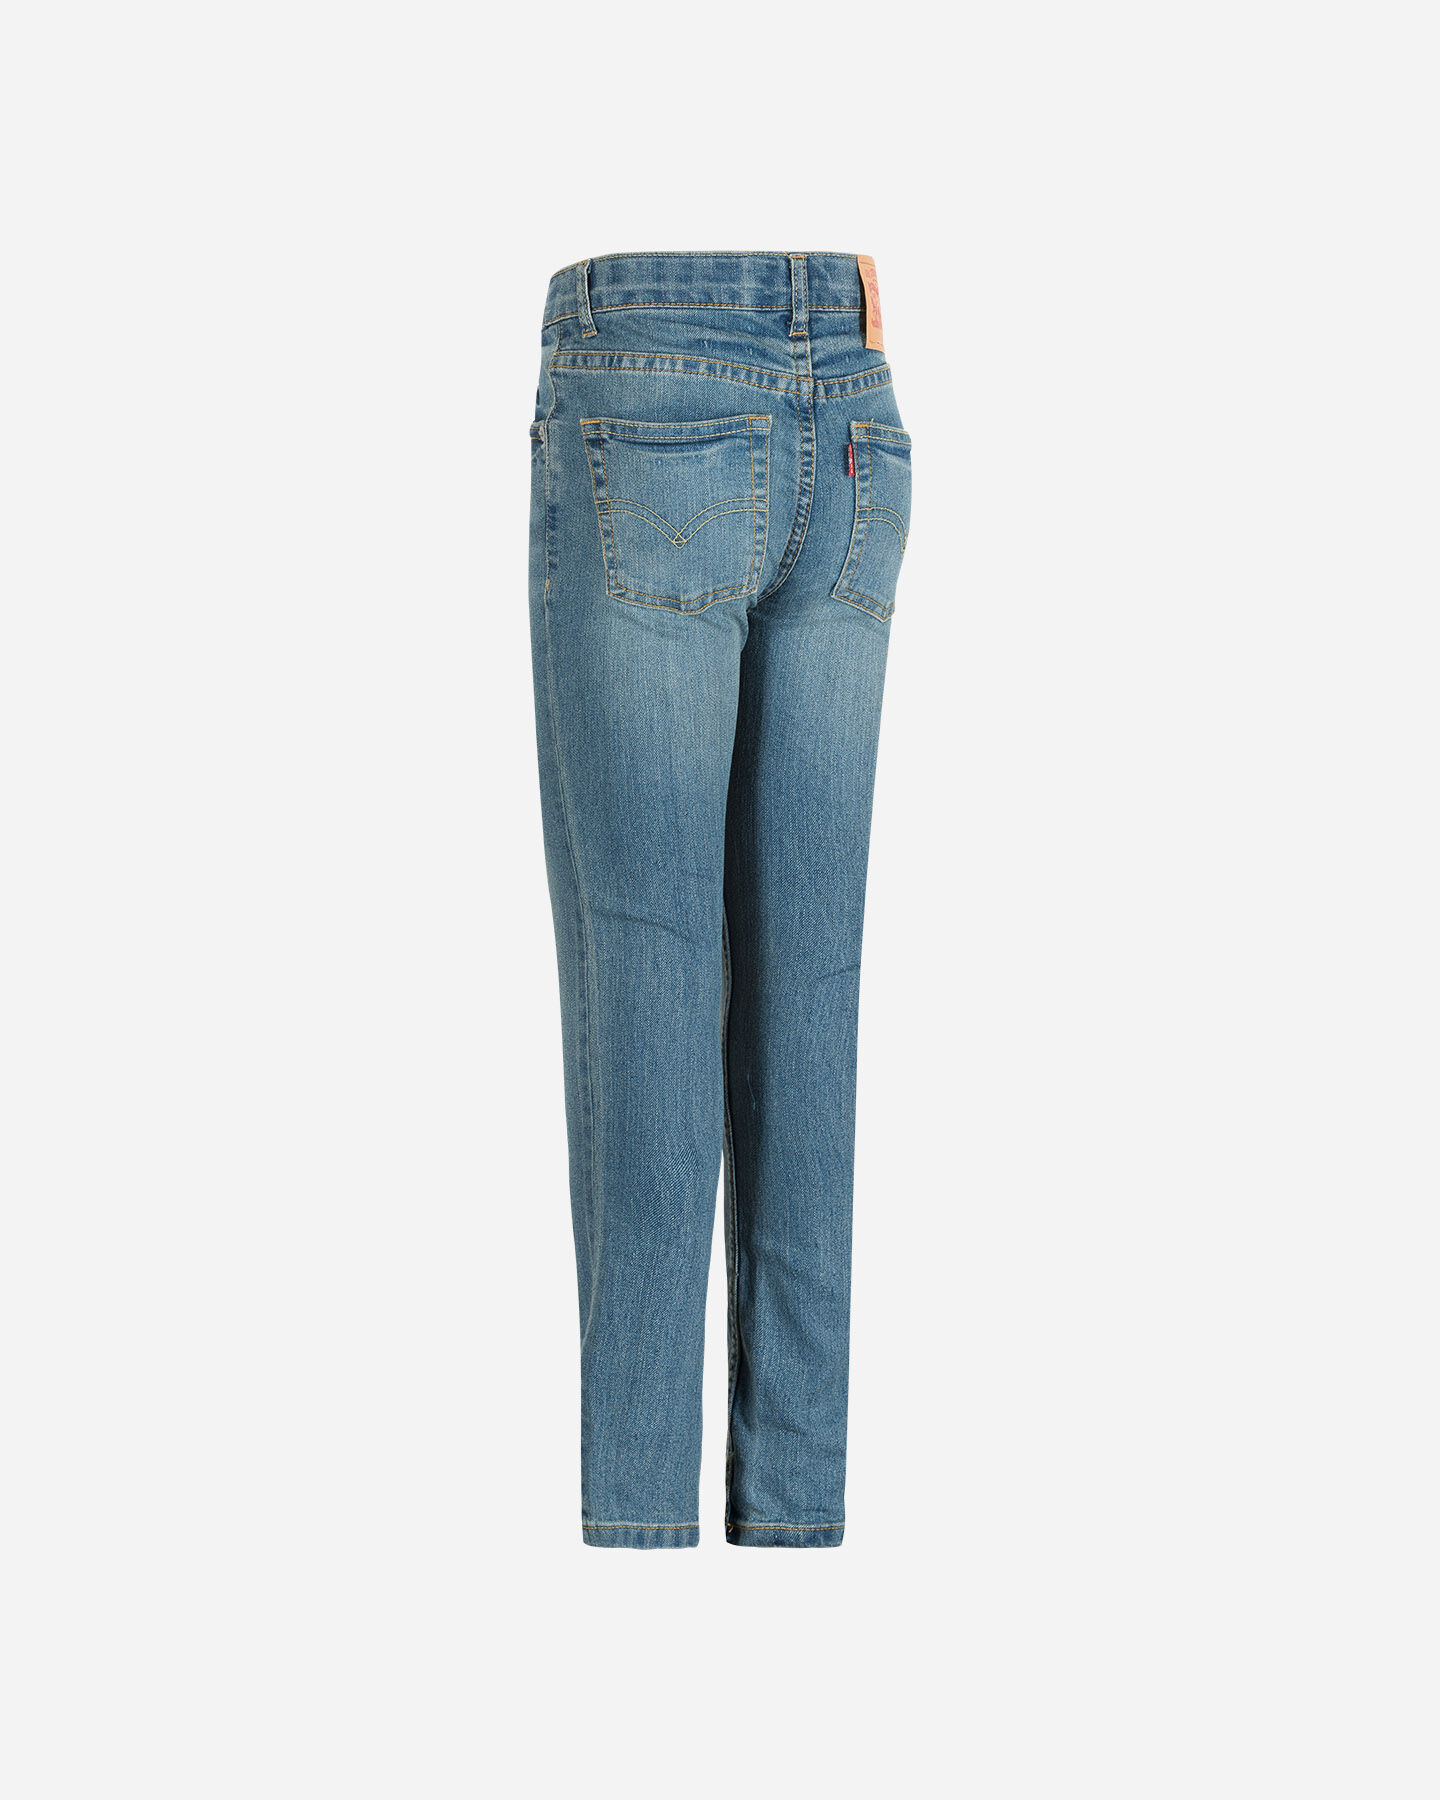  Jeans LEVI'S 510 SKINNY JR S4083739|L5D|6A scatto 1